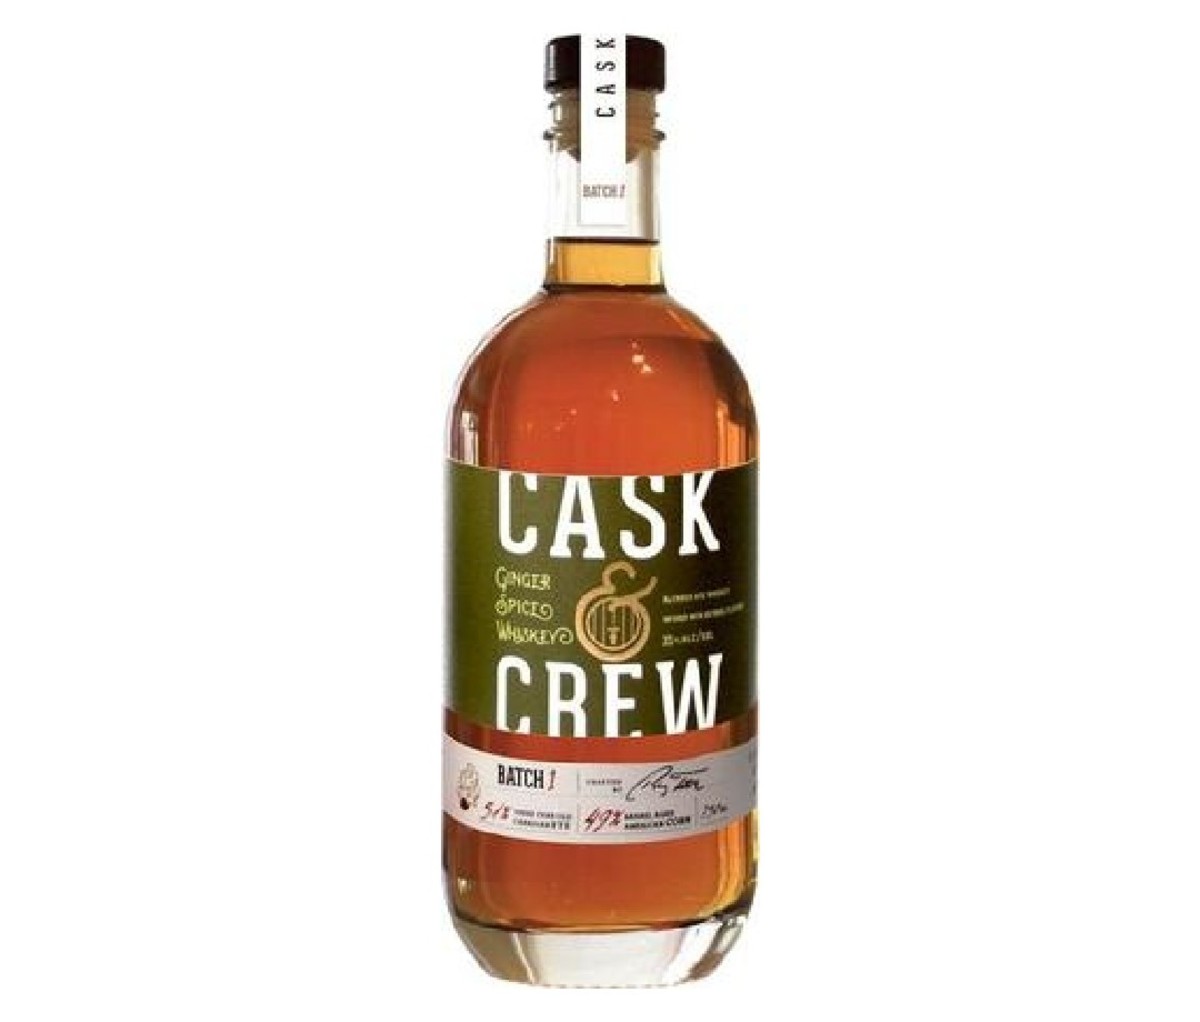 A bottle of Cask & Crew Ginger Spice Whiskey.